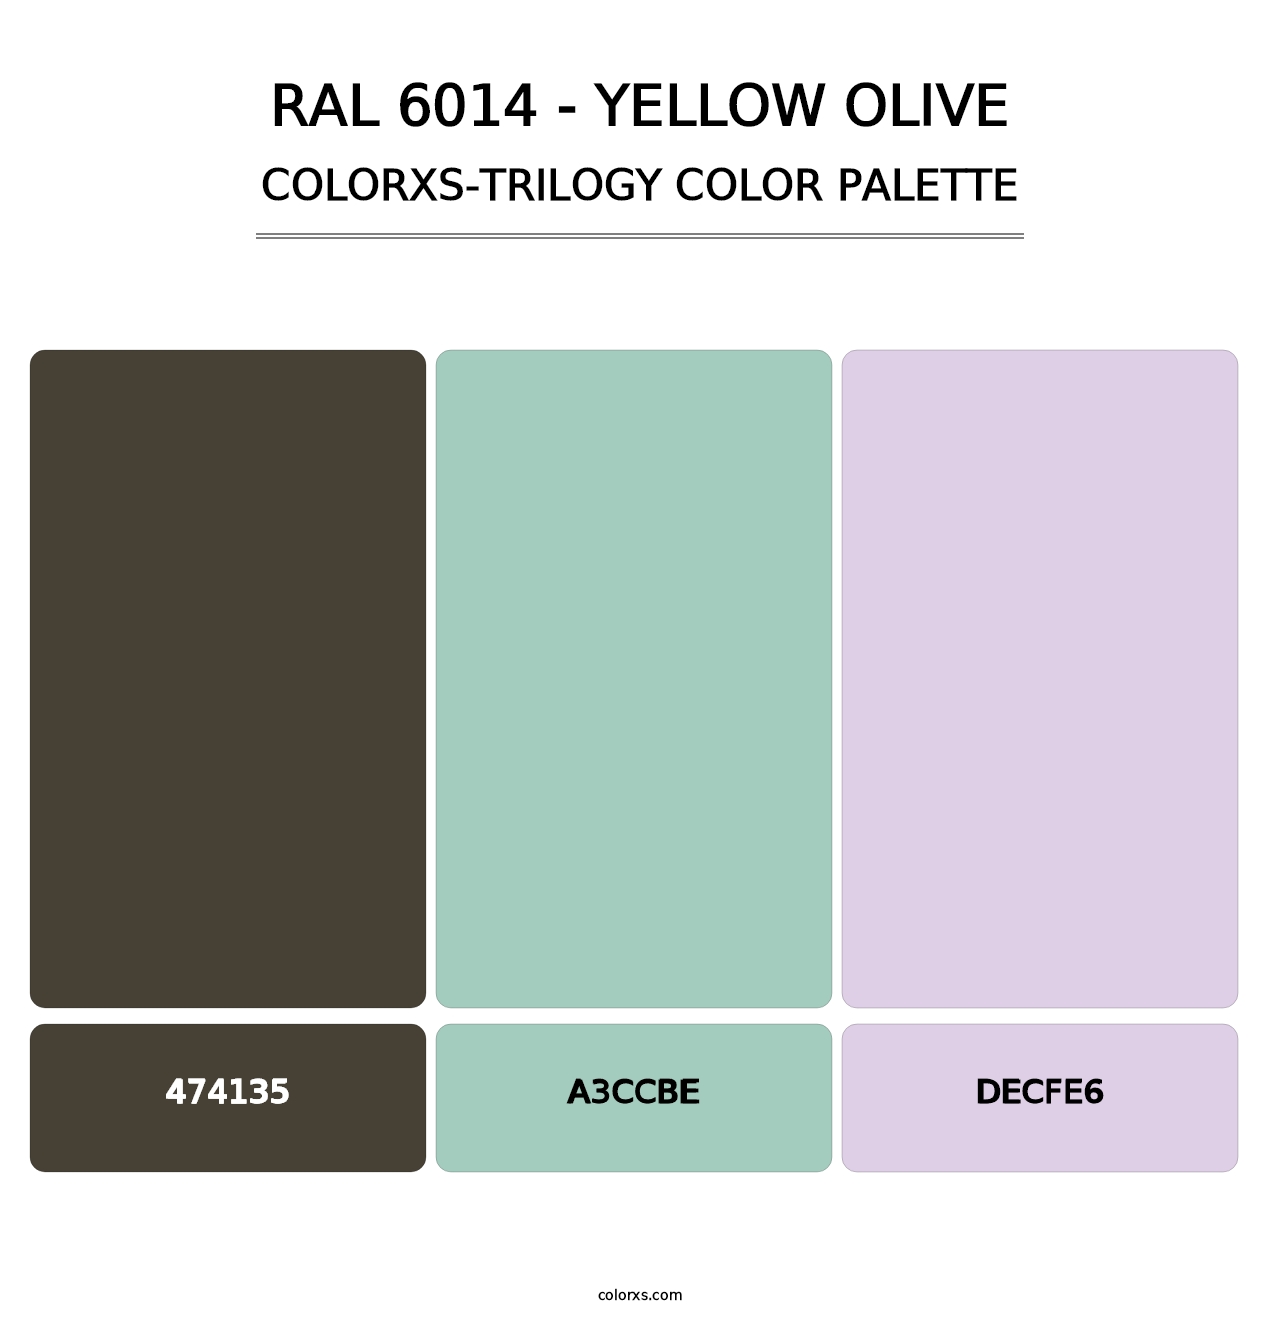 RAL 6014 - Yellow Olive - Colorxs Trilogy Palette